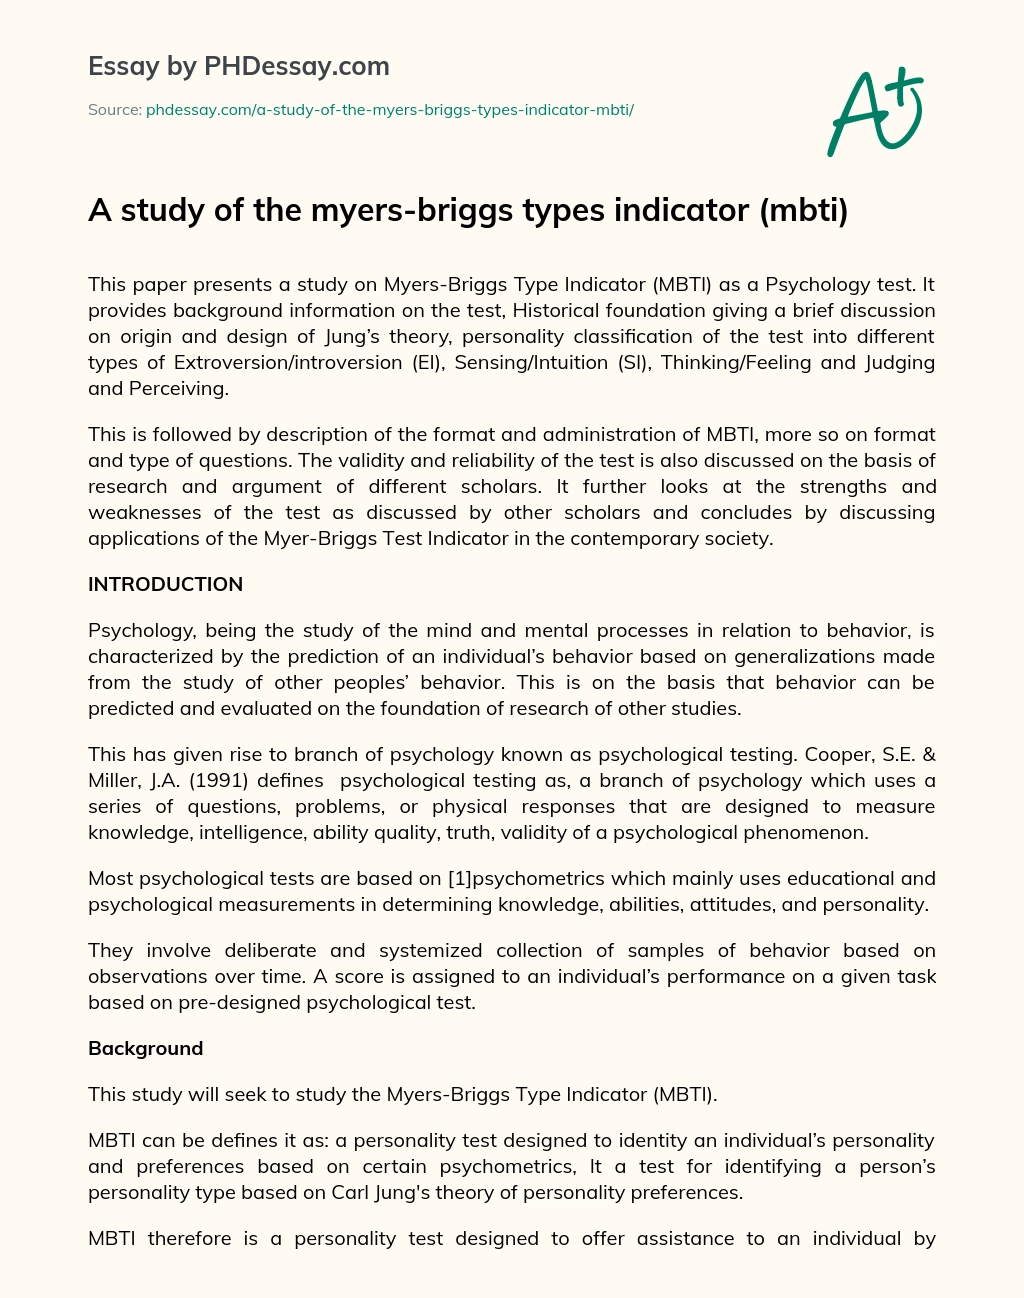 A study of the myers-briggs types indicator (mbti) essay